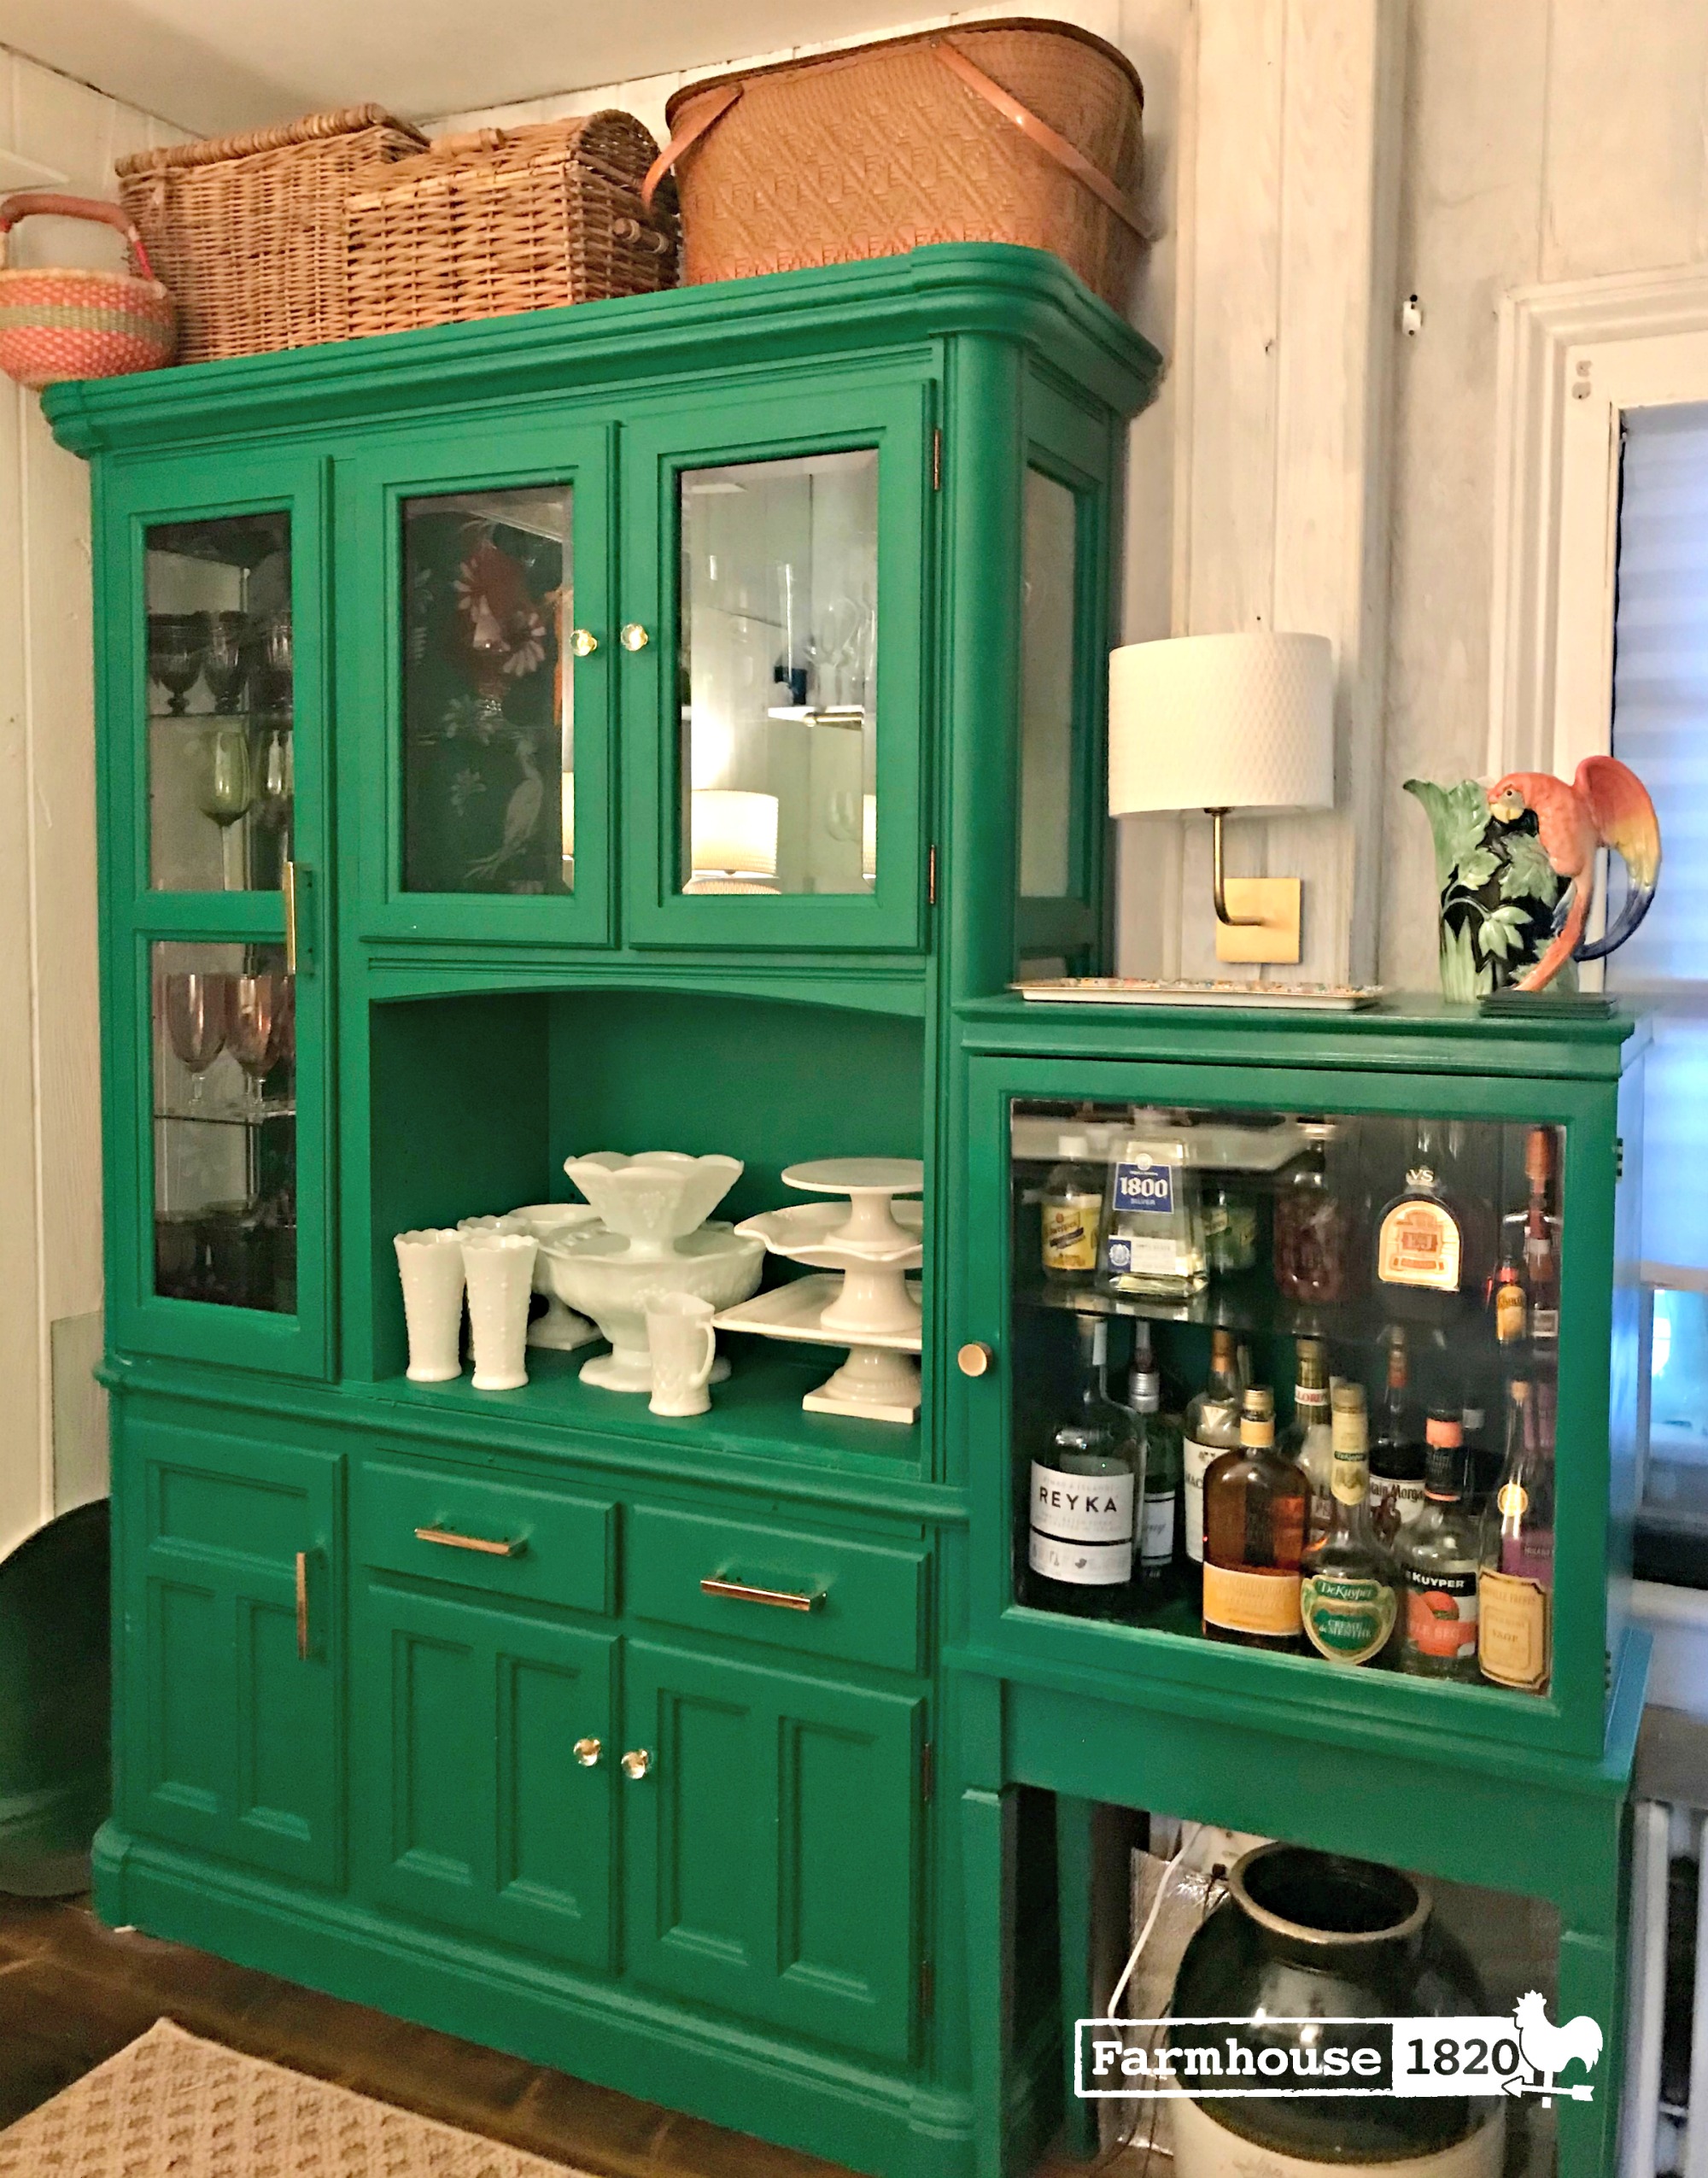 butler's pantry - how to display dishes and booze in a butler's pantry